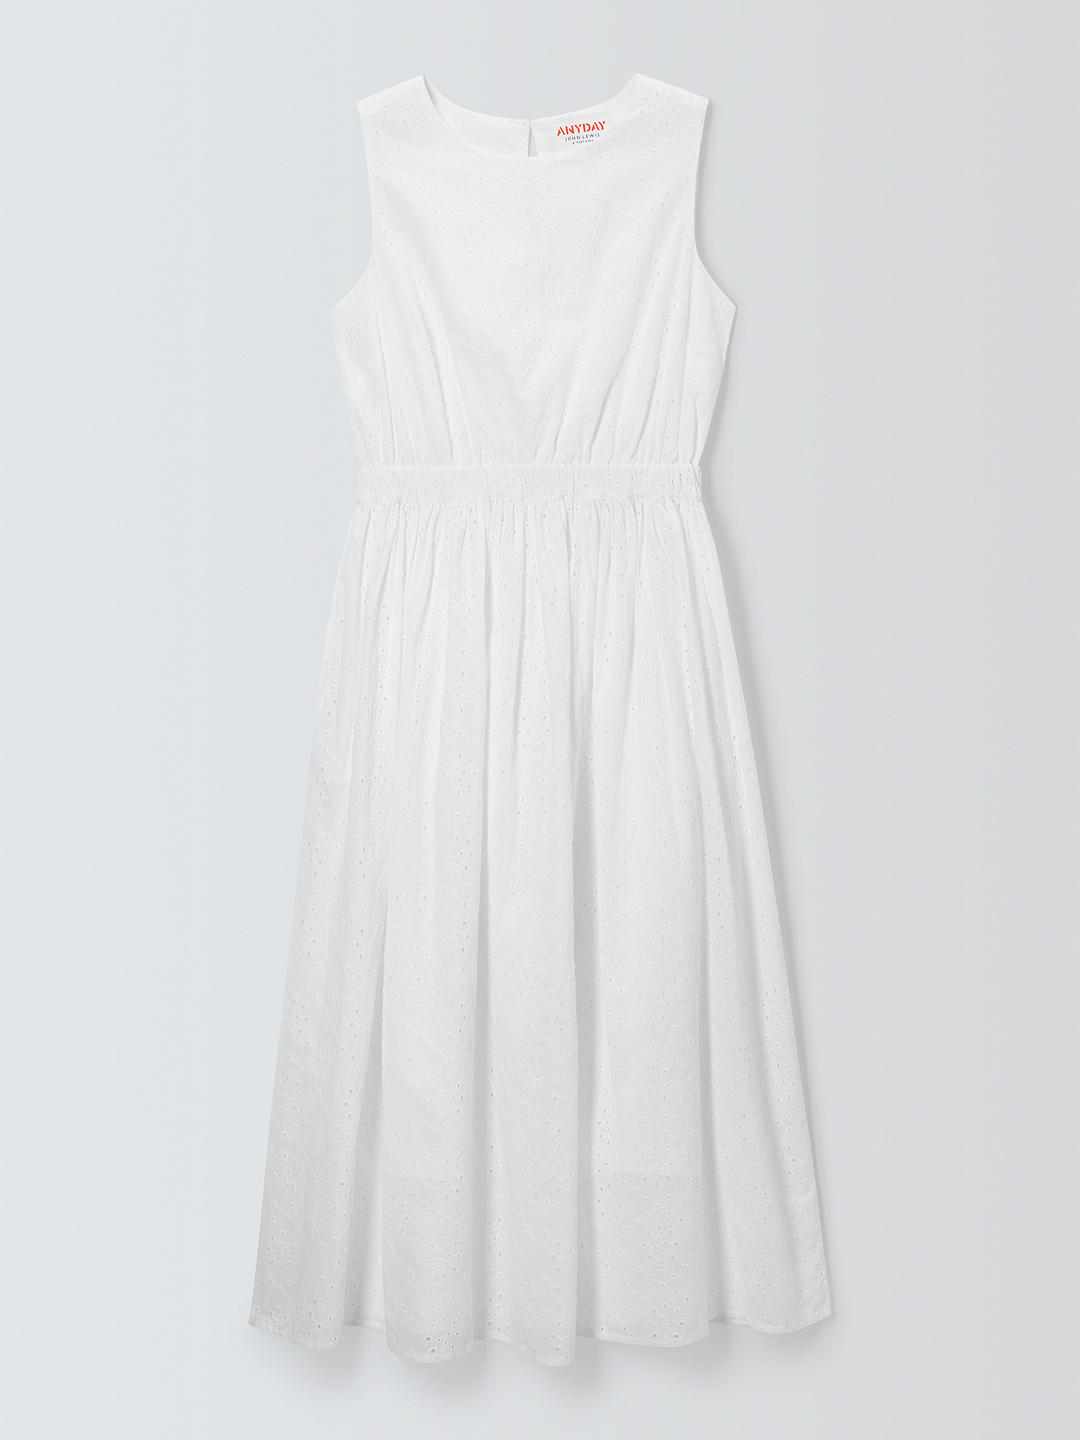 John Lewis ANYDAY Broderie Dress, White